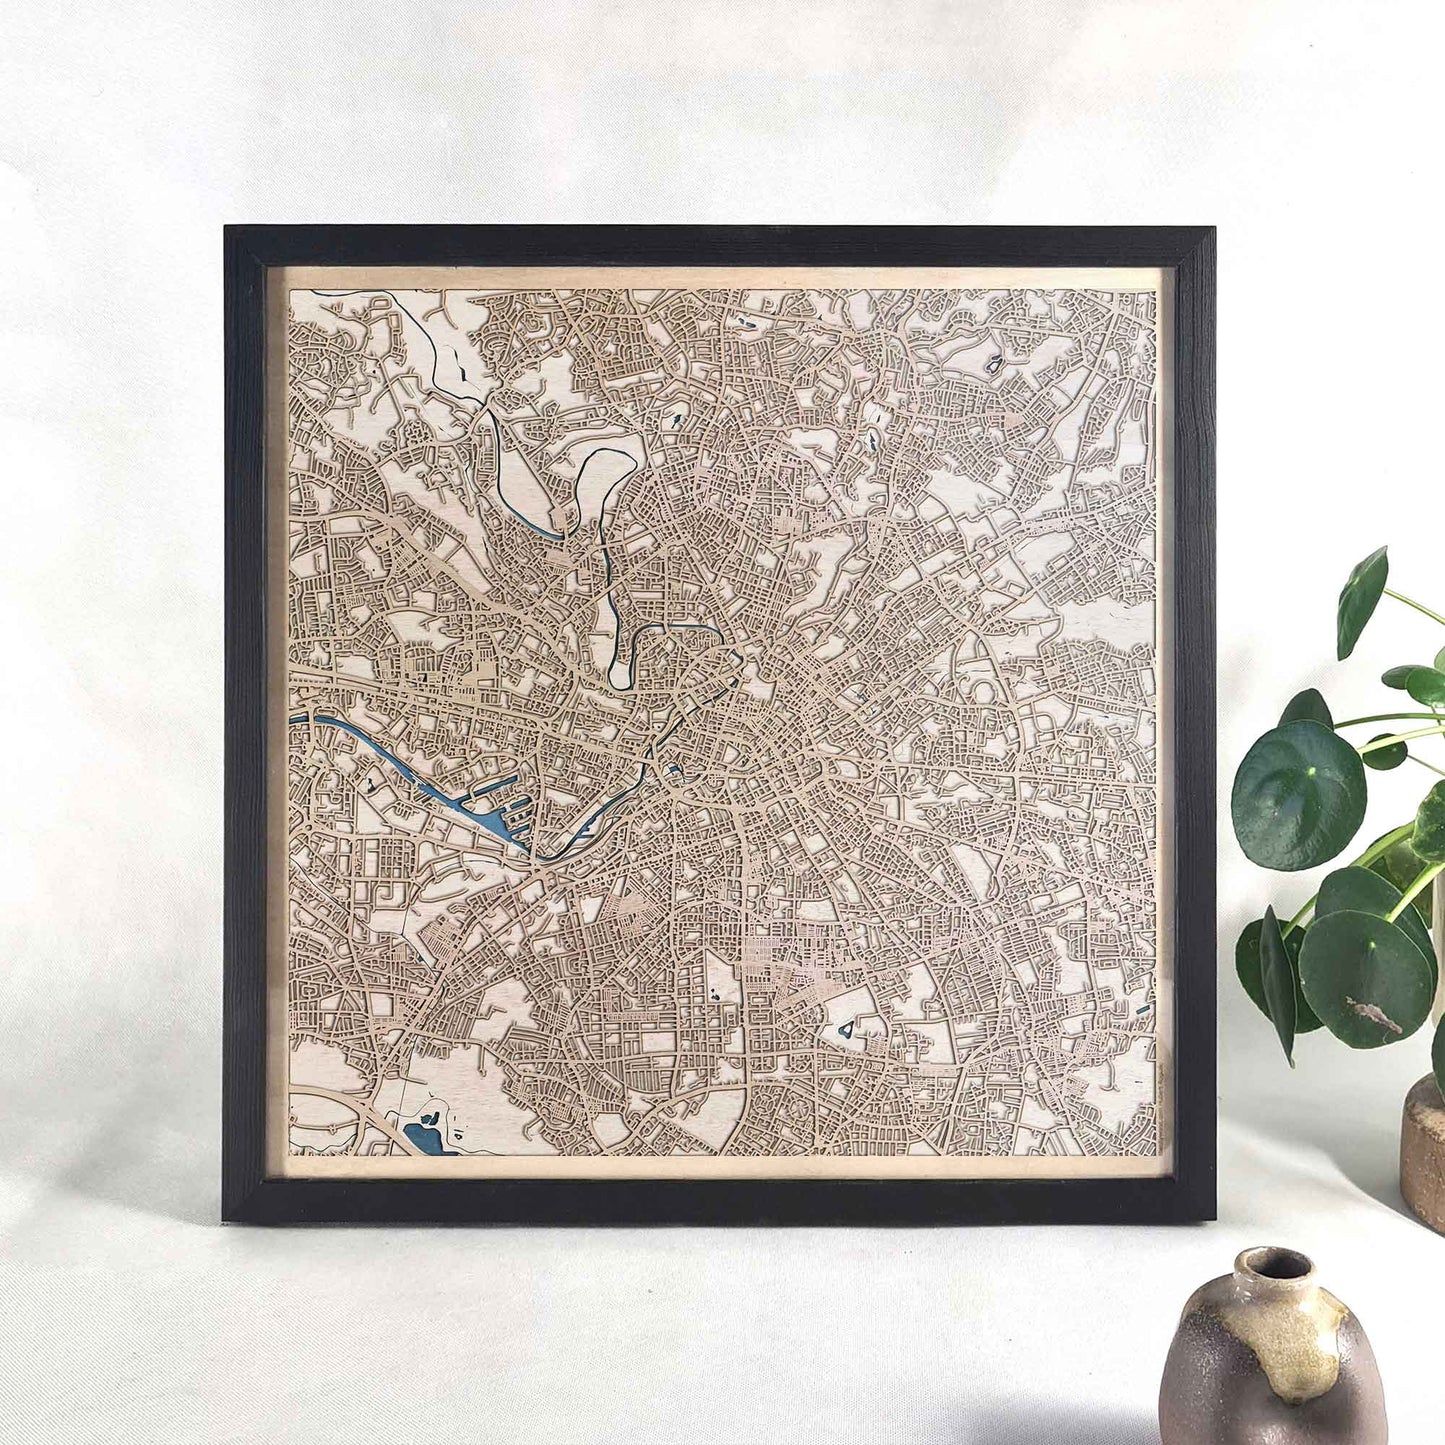 Manchester Wooden Map by CityWood - Custom Wood Map Art - Unique Laser Cut Engraved - Anniversary Gift